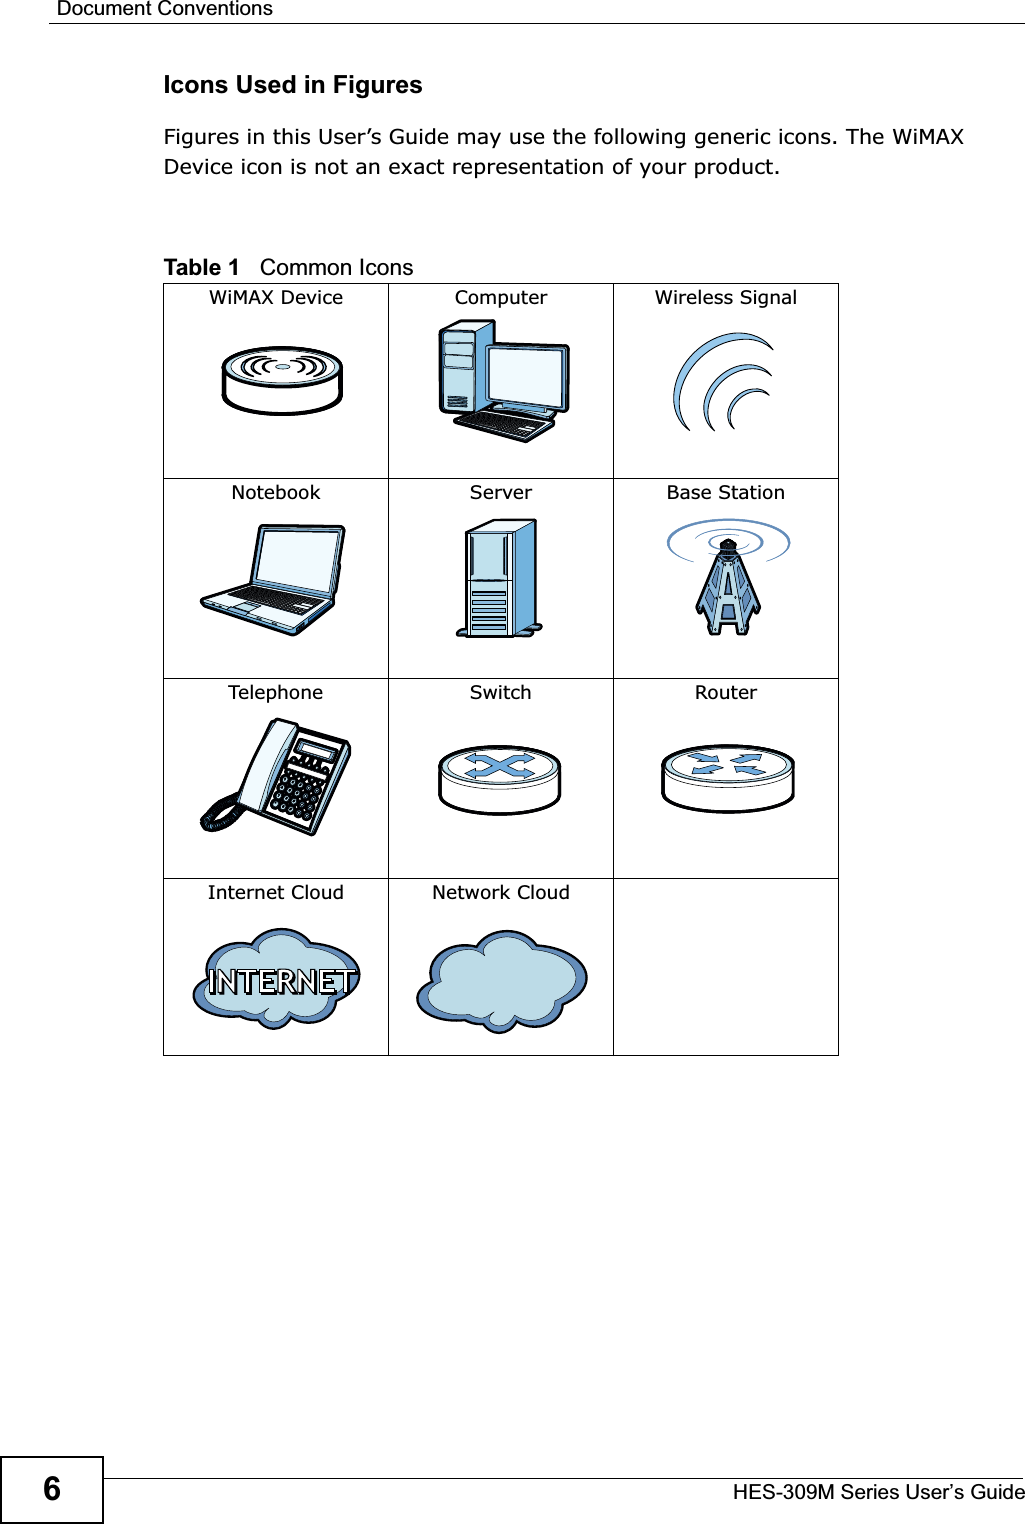 Document ConventionsHES-309M Series User’s Guide6Icons Used in FiguresFigures in this User’s Guide may use the following generic icons. The WiMAX Device icon is not an exact representation of your product.Table 1   Common IconsWiMAX Device  Computer Wireless SignalNotebook Server Base StationTelephone Switch RouterInternet Cloud Network Cloud